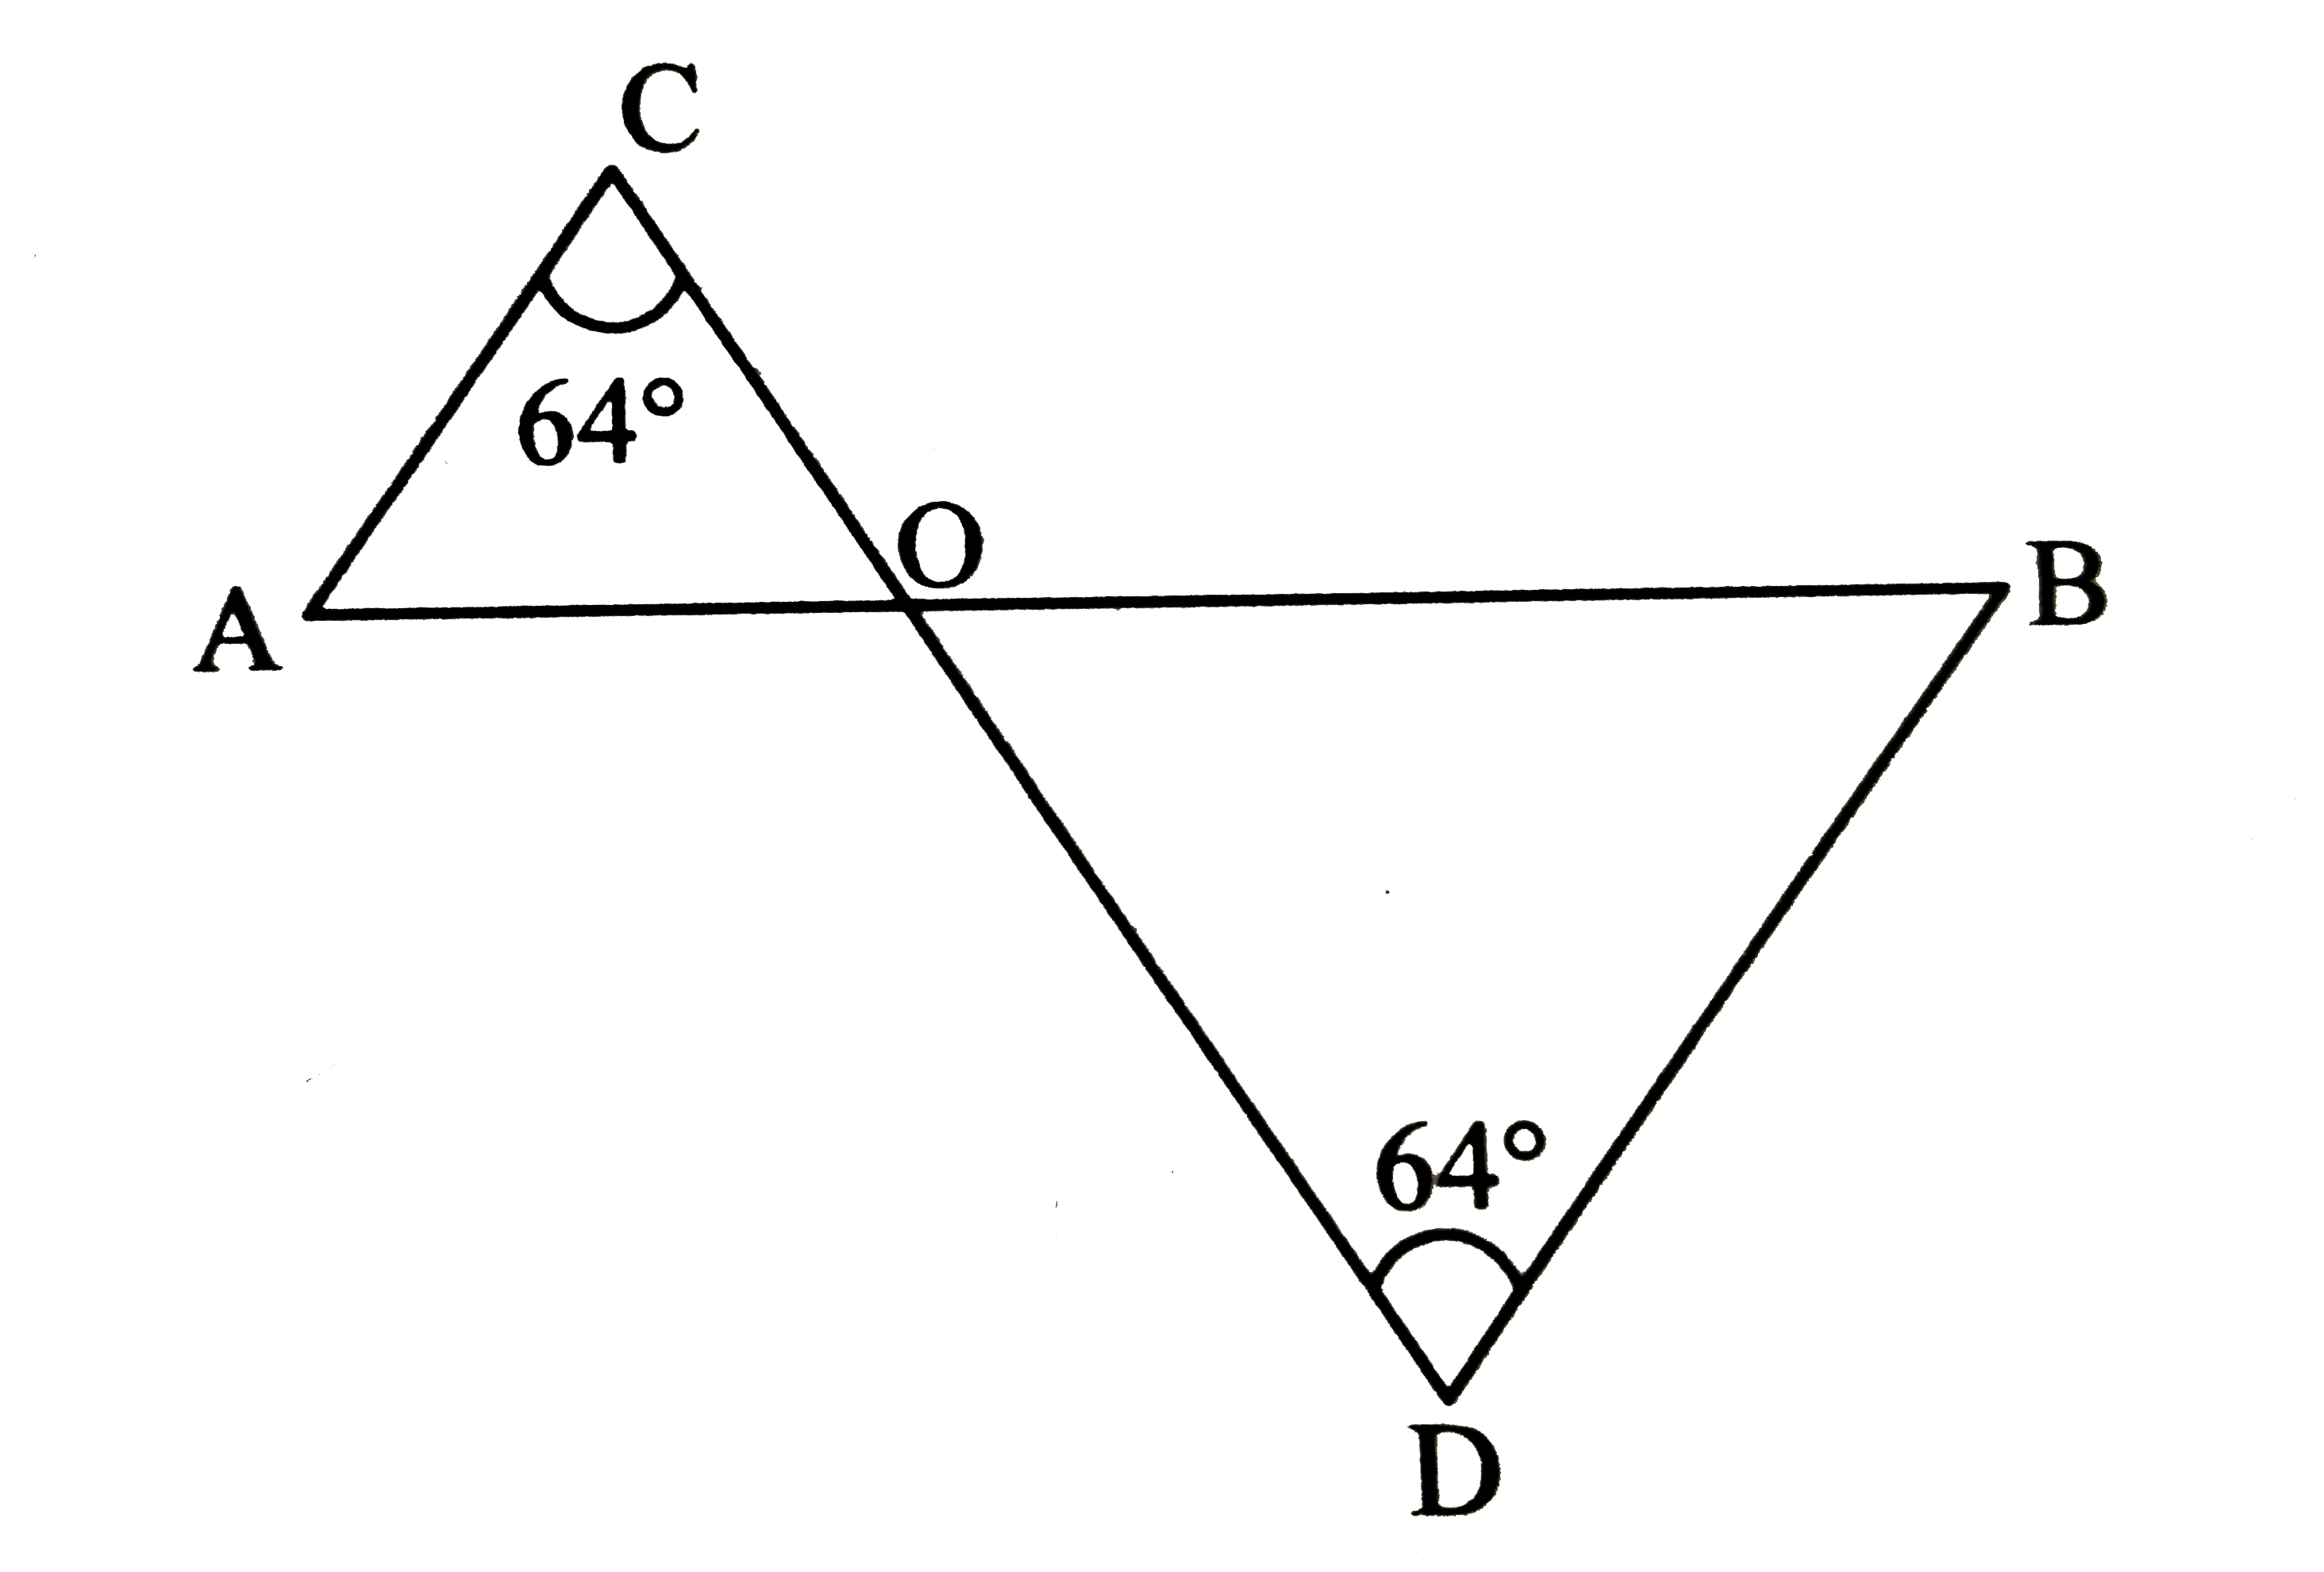 Are the triangle shown in the figure below similar? If so, by which test of similarity?